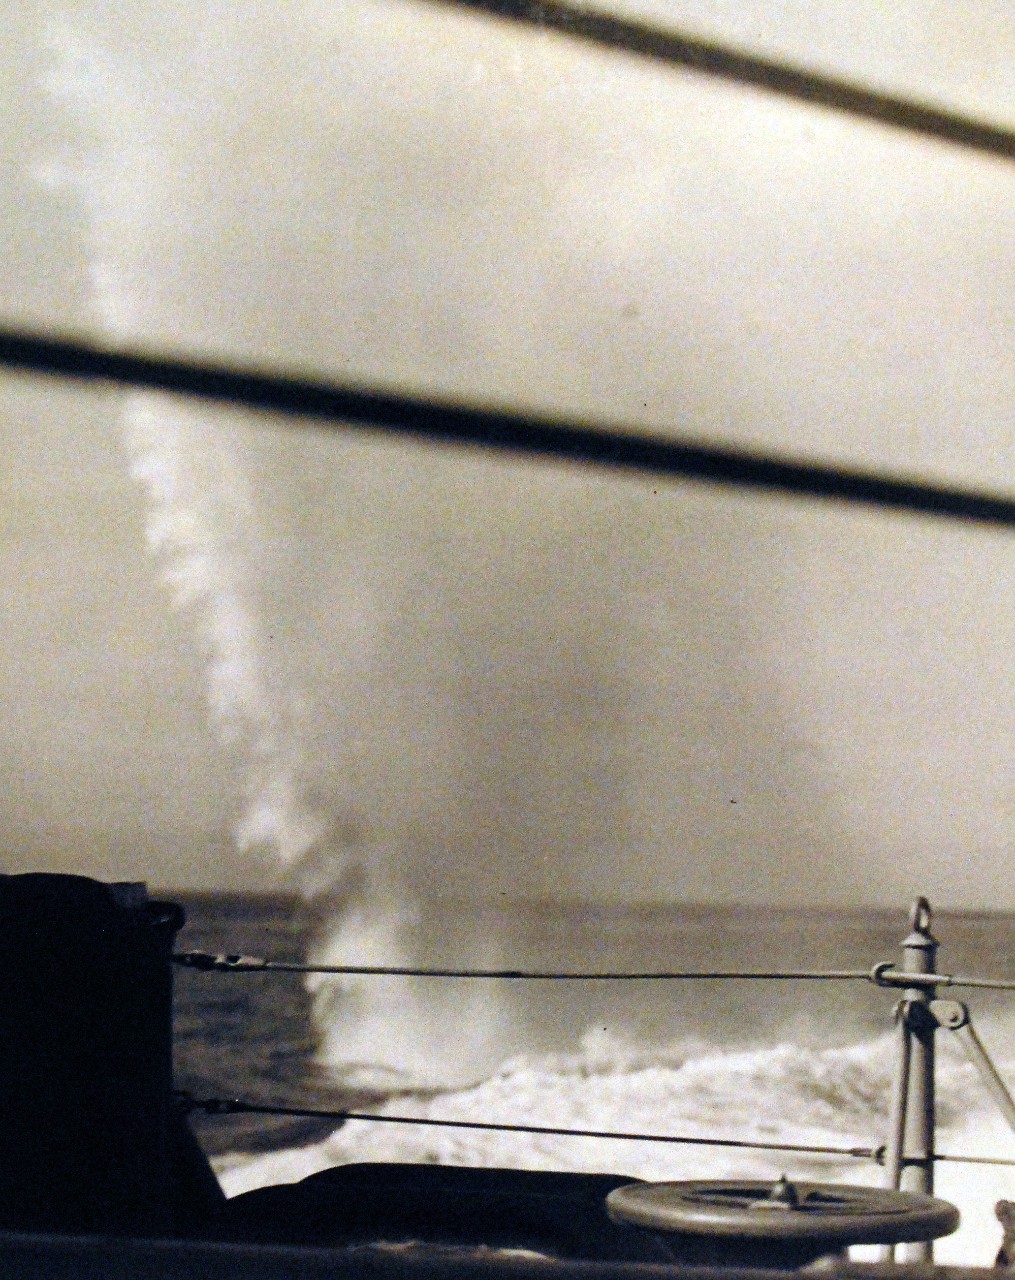 <p>80-G-38826: Naval Battle of Casablanca, 8-16 November 1942. Shells from French battleship Jean Bart land in the water near USS Massachusetts (BB 59). Shown is a near miss of 15” shell just off the fantail.&nbsp;</p>
